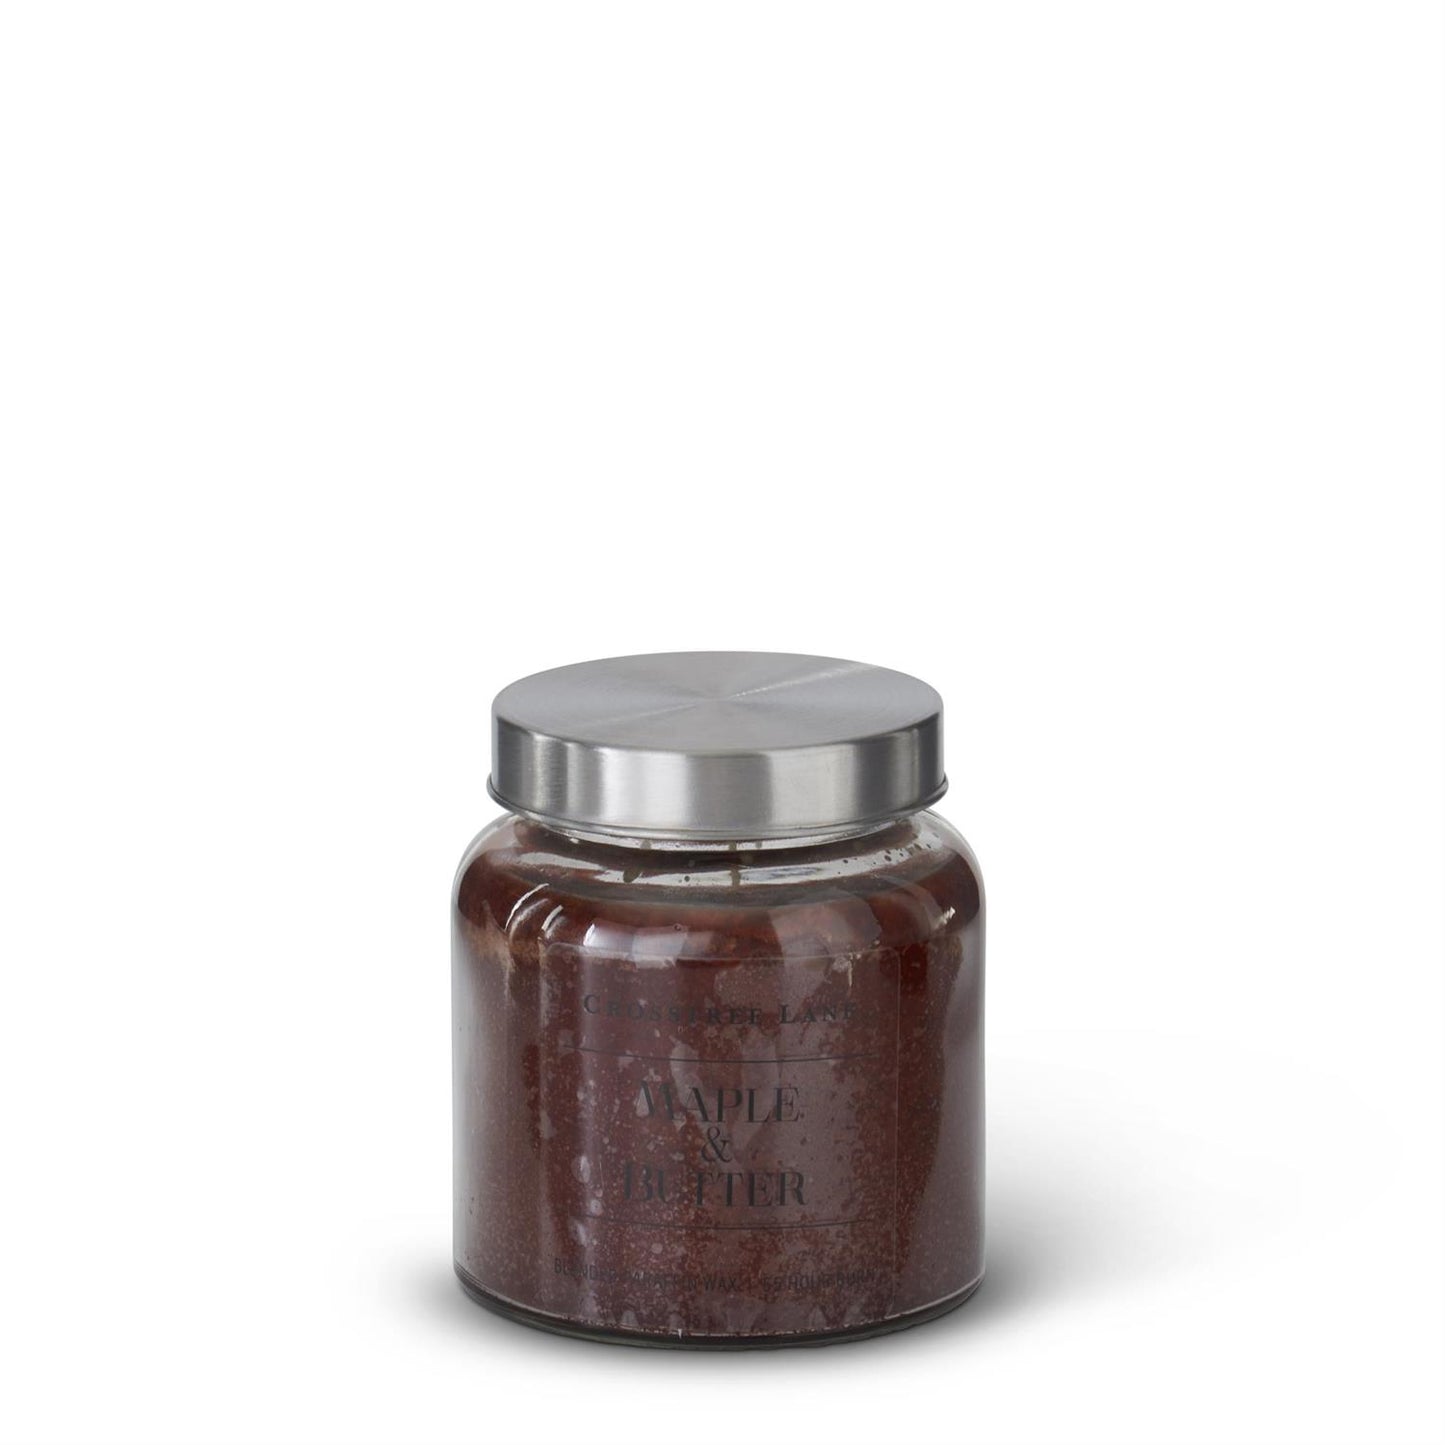 Crosstree Lane Candle 11oz | Maple & Butter